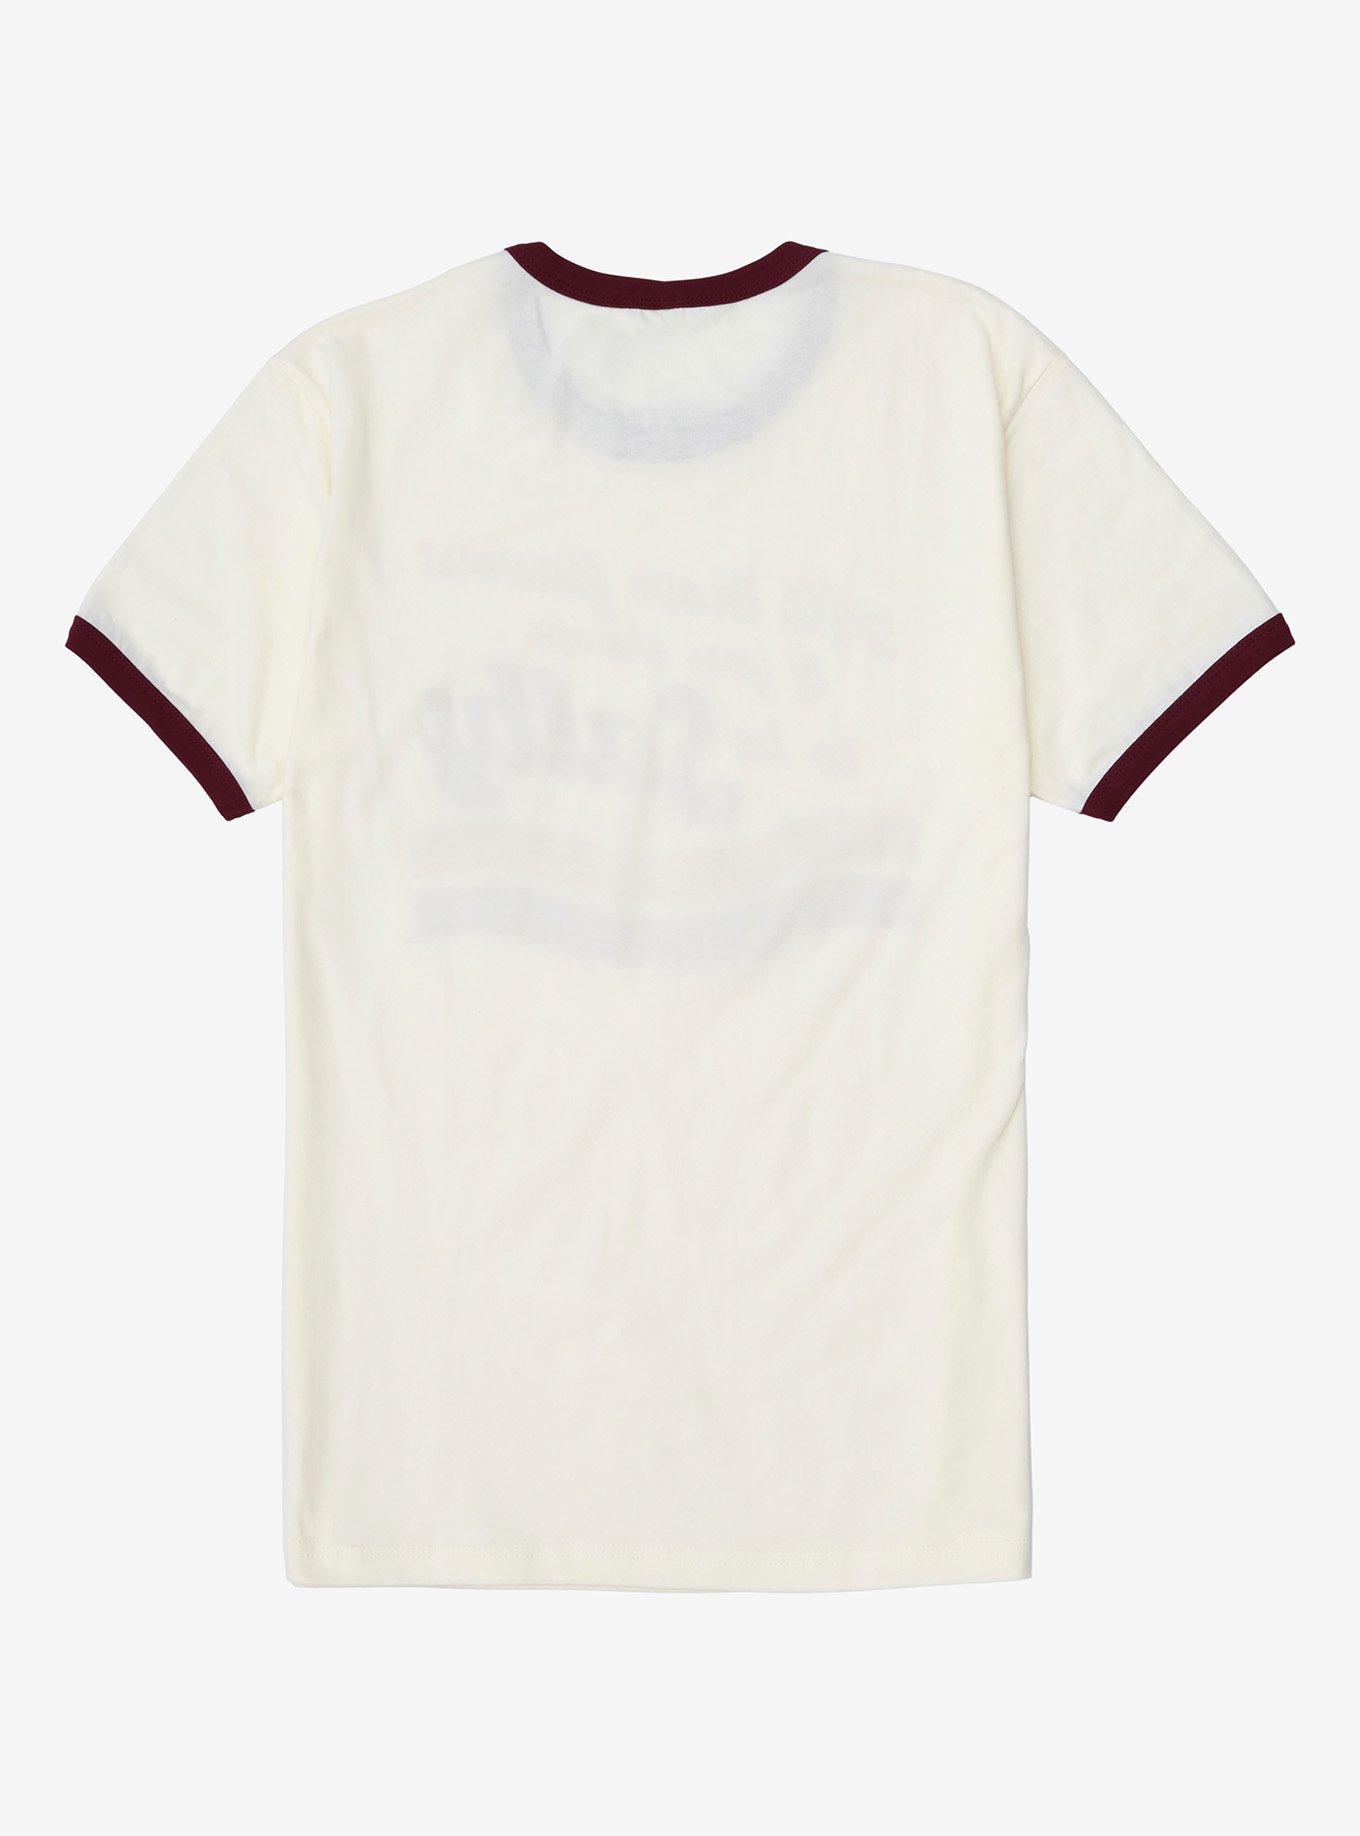 Maruchan All These Flavors Ringer T-Shirt - BoxLunch Exclusive, MAROON, alternate